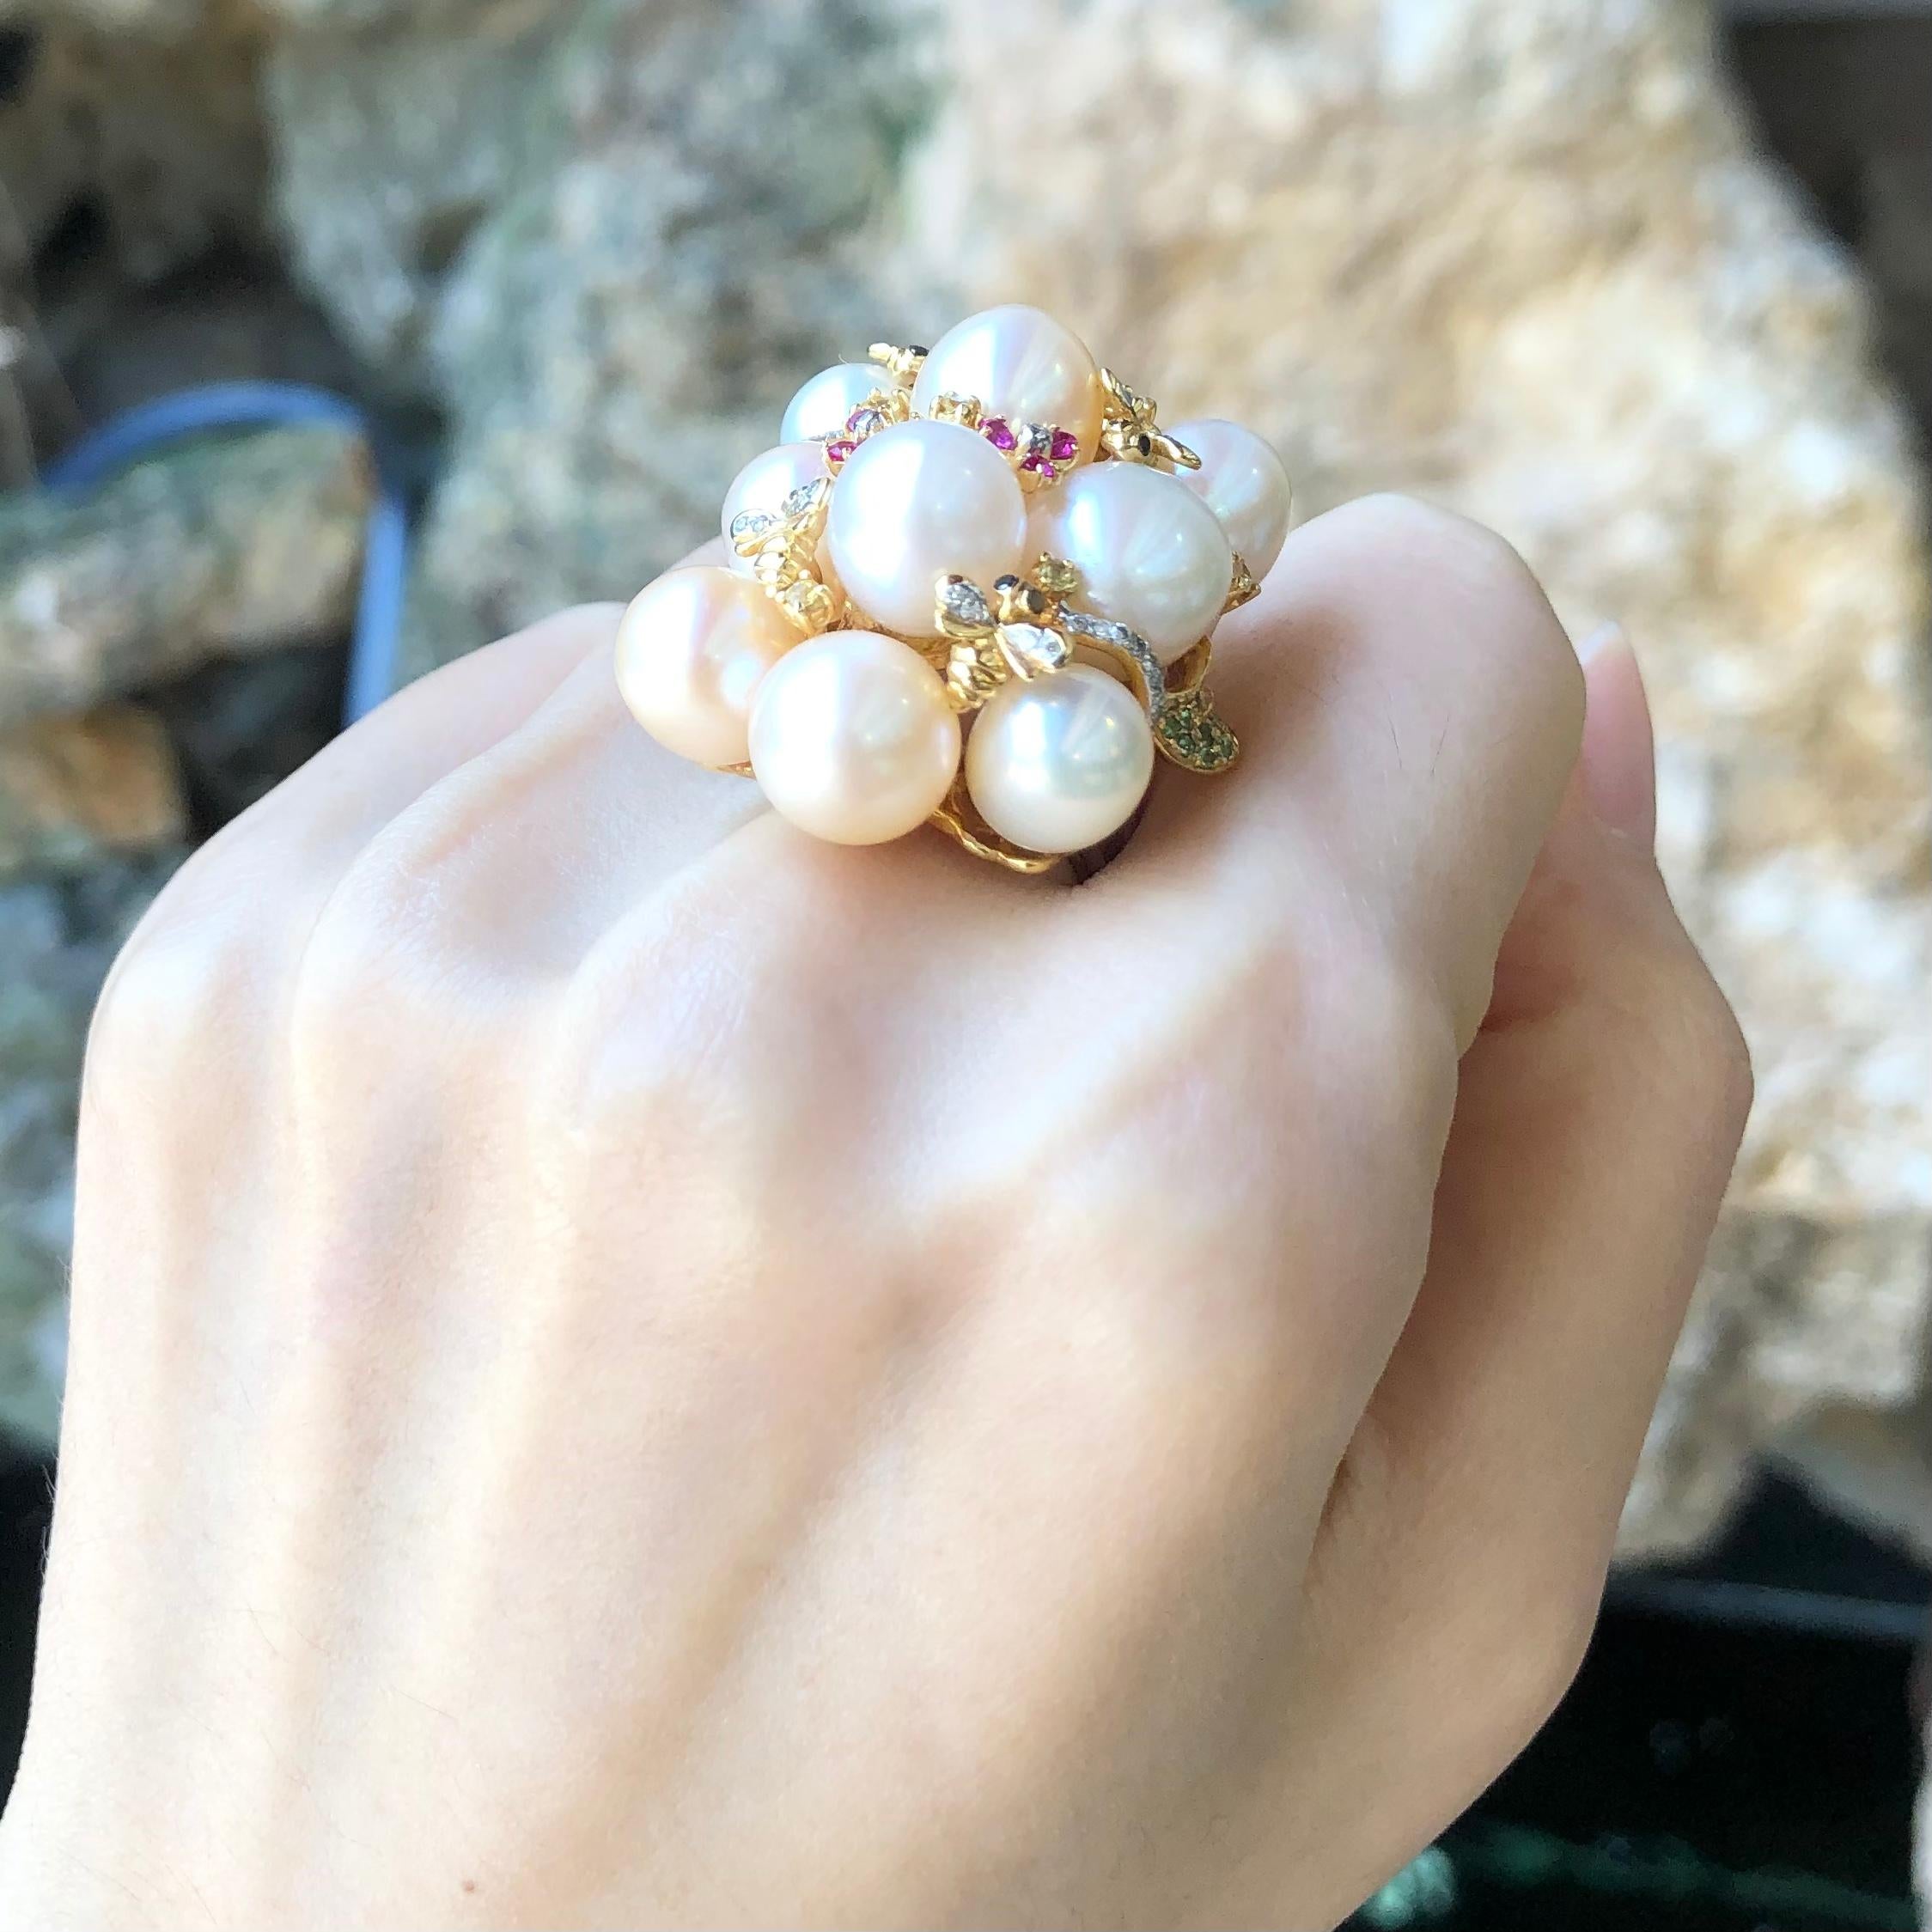 Fresh Water Pearl with Ruby, Yellow Sapphire, Tsavorite 0.72 carat and Diamond 0.16 carat Ring set in 18 Karat Gold Settings

Width:  3.0 cm 
Length: 3.8 cm
Ring Size: 54
Total Weight: 27.0 grams



